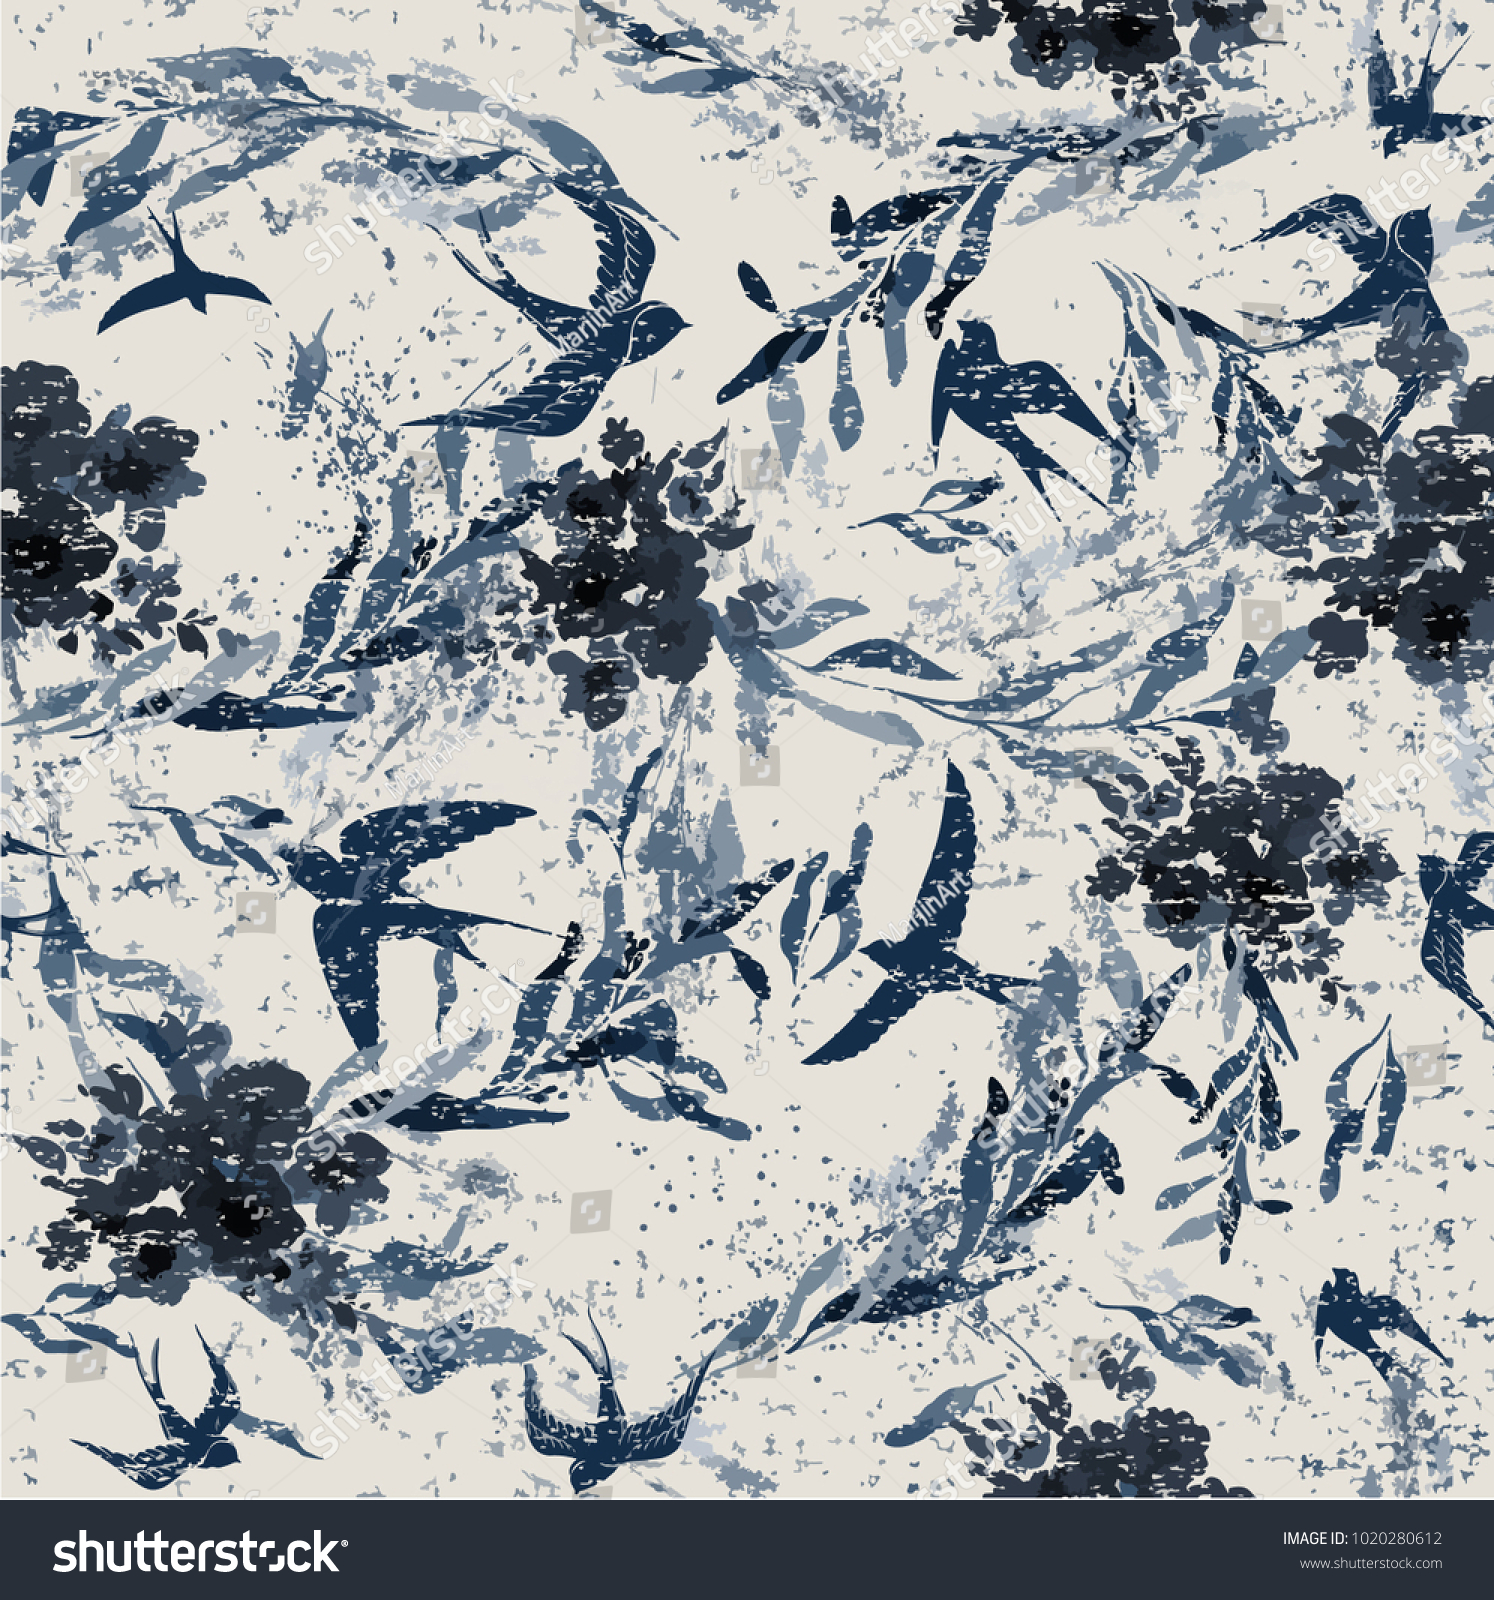 Birds and flowers in grunge texture. Print pattern. #1020280612